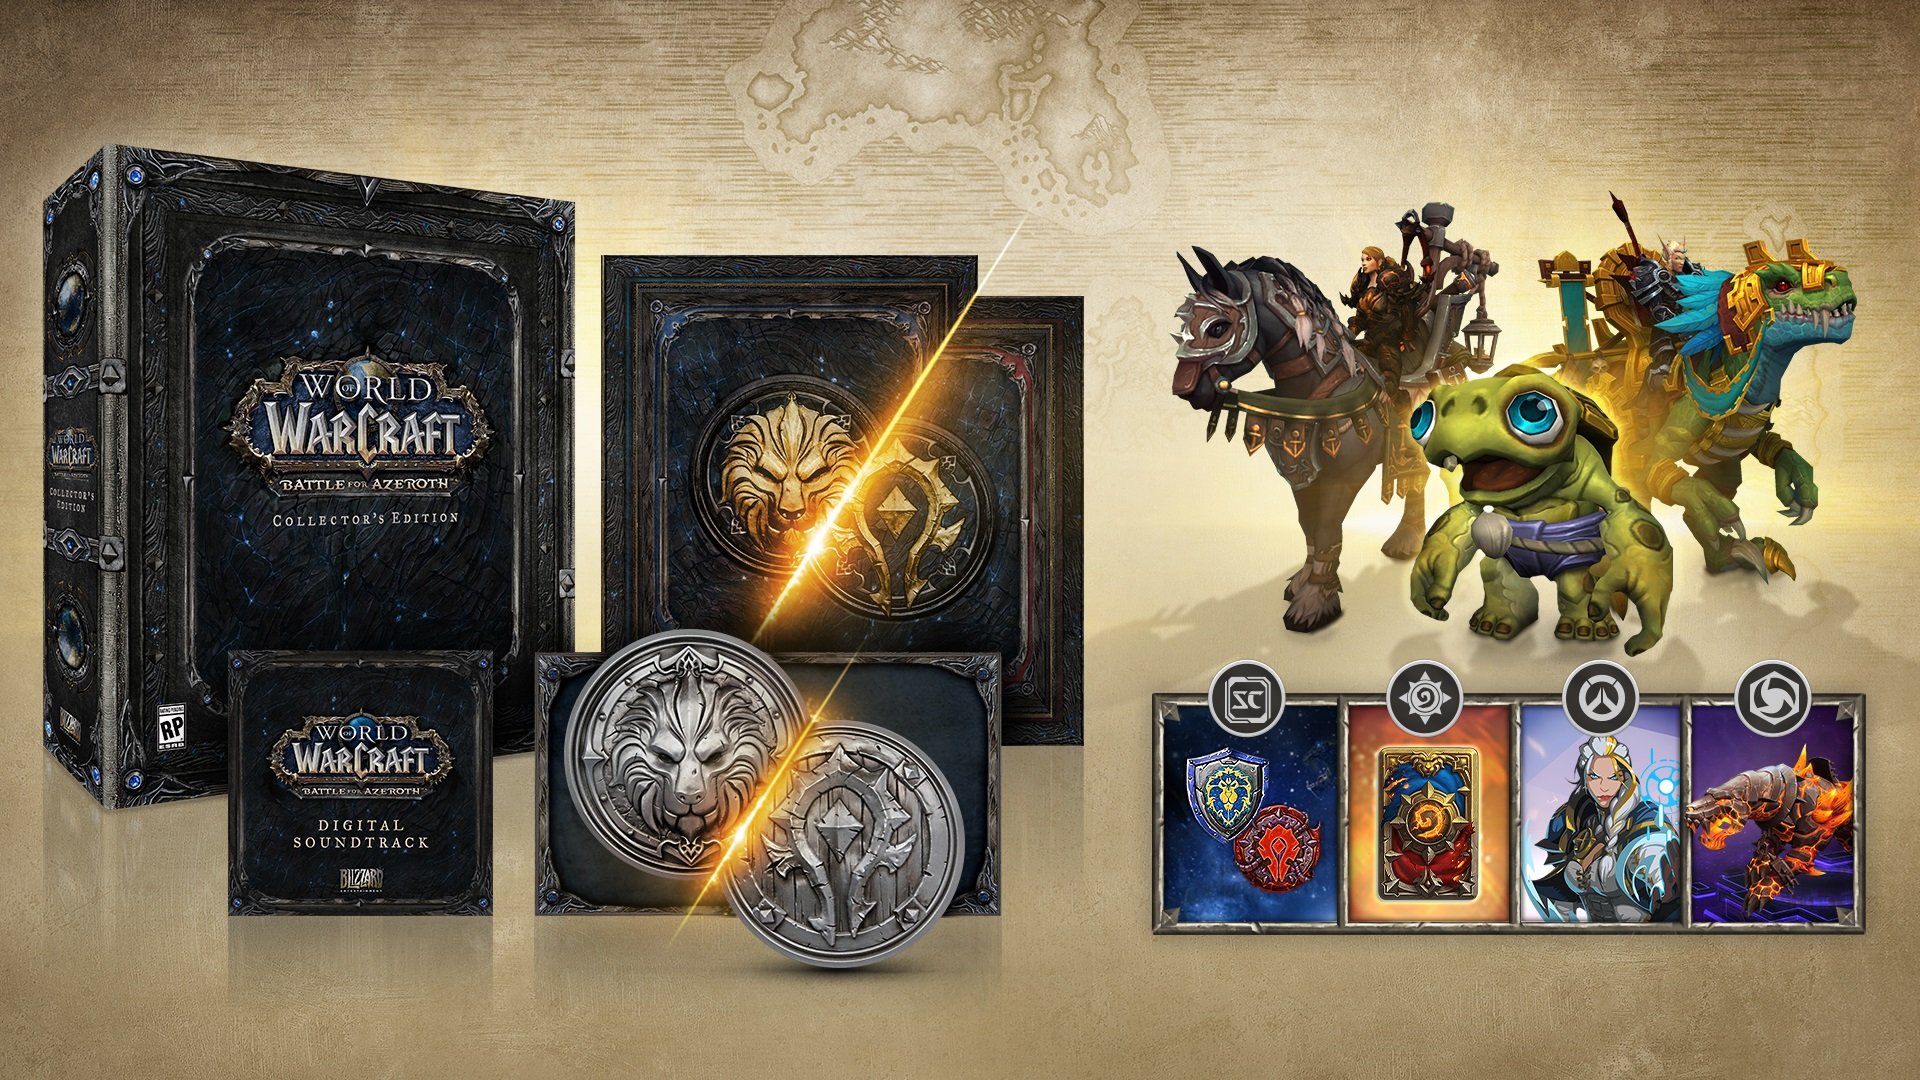 World of Warcraft Battle for Azeroth collector's edition